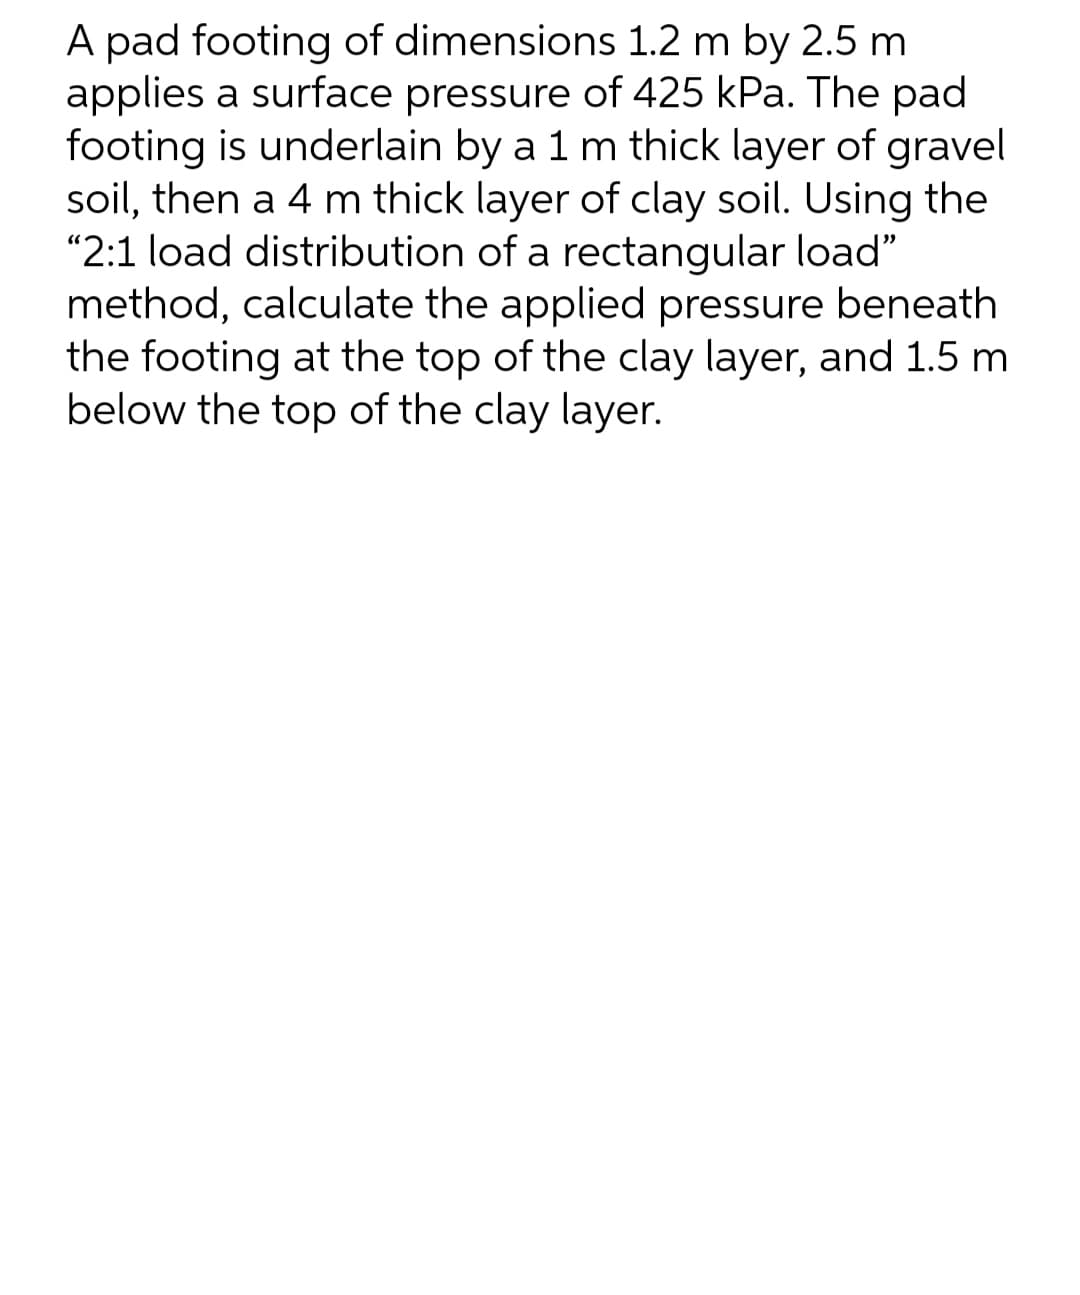 A pad footing of dimensions 1.2 m by 2.5 m.
applies a surface pressure of 425 kPa. The pad
footing is underlain by a 1 m thick layer of gravel
soil, then a 4 m thick layer of clay soil. Using the
"2:1 load distribution of a rectangular load"
method, calculate the applied pressure beneath
the footing at the top of the clay layer, and 1.5 m
below the top of the clay layer.